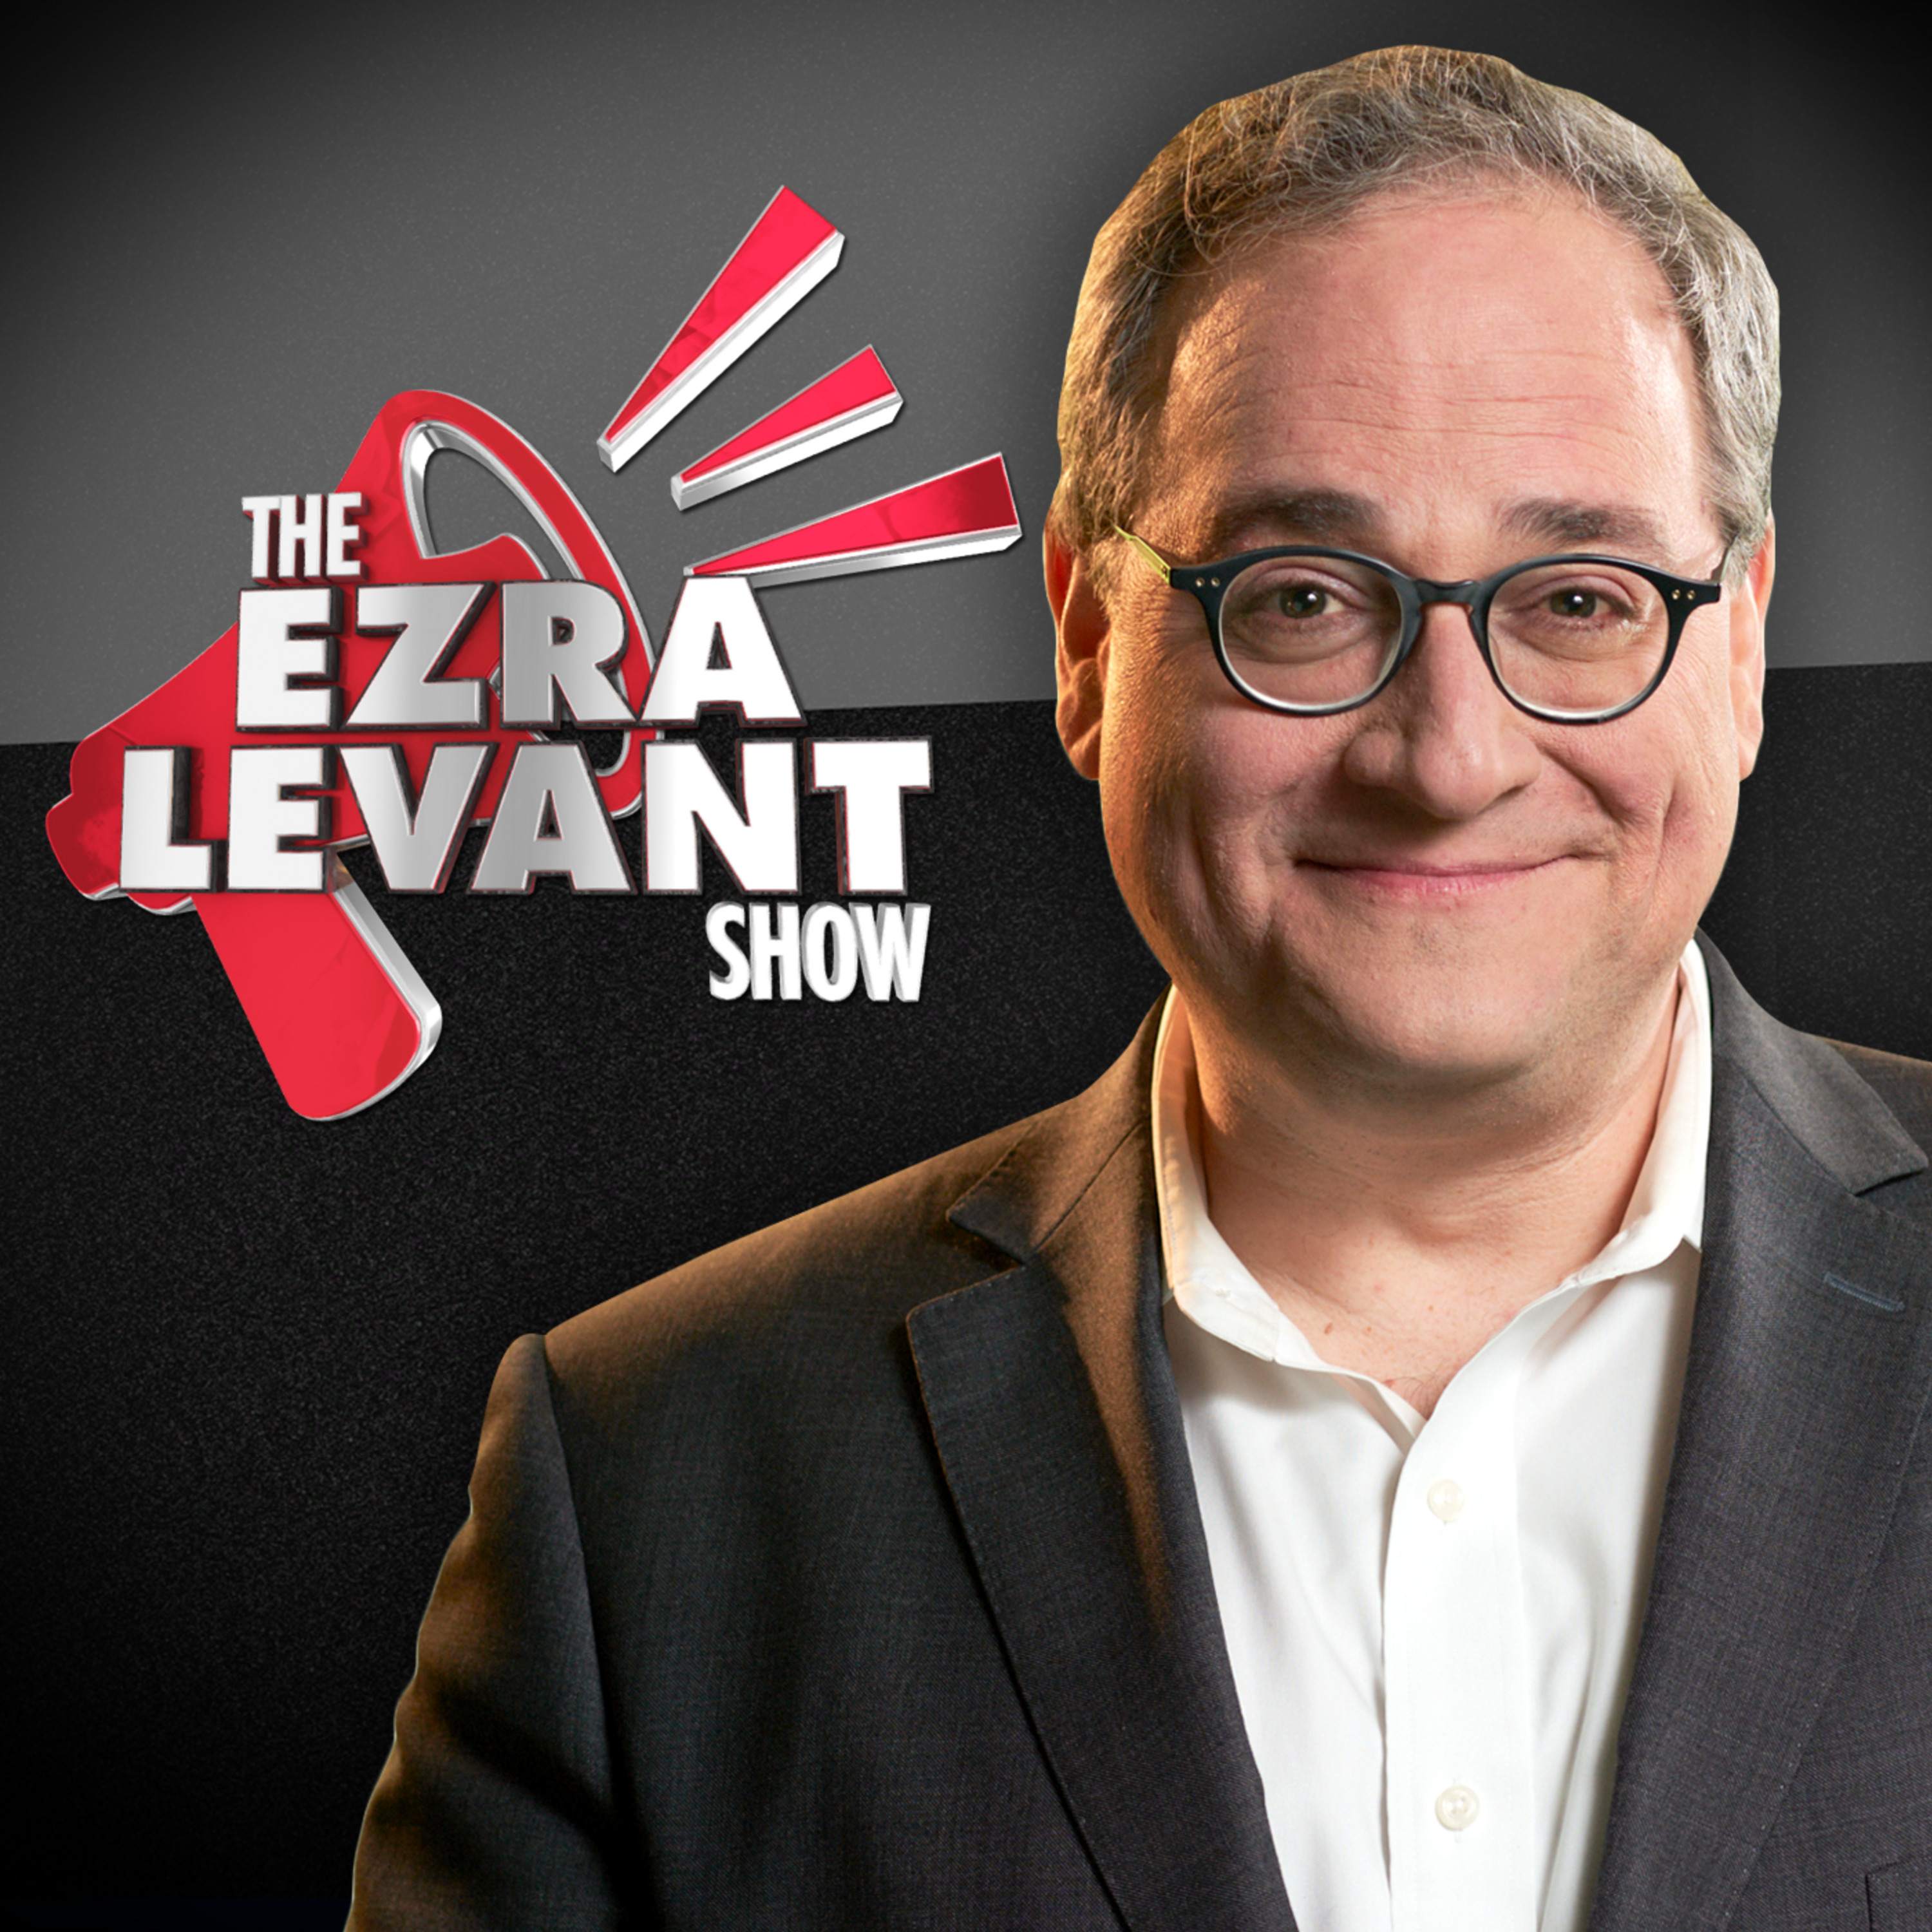 EZRA LEVANT | Ontario had its election debate, but what was the difference among the candidates?